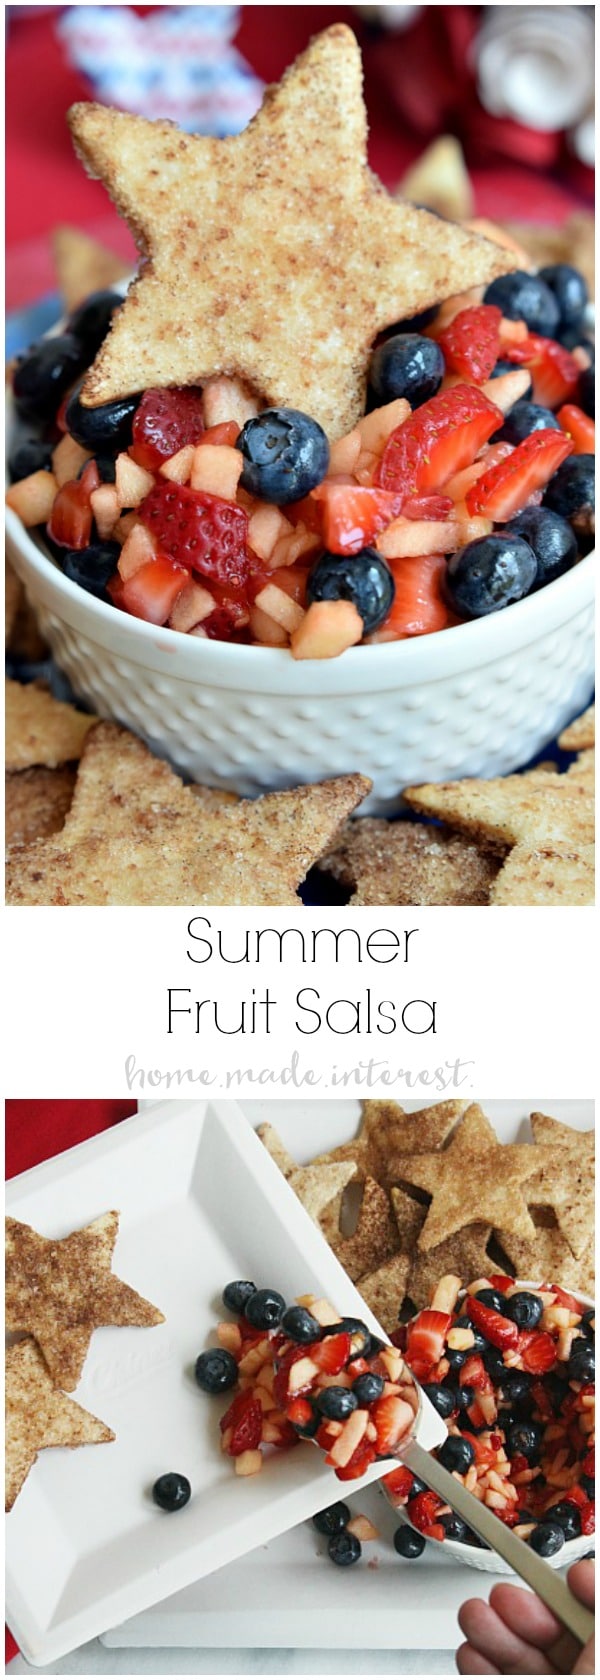 Blueberries, apples, and strawberries make up this light and fresh summer fruit salsa. It is perfect side dish or dessert recipe for Memorial Day, 4th of July, and Labor Day cookouts with it’s beautiful red, white, and blue colors and served with crisp, sweet, cinnamon chips shaped like stars. 